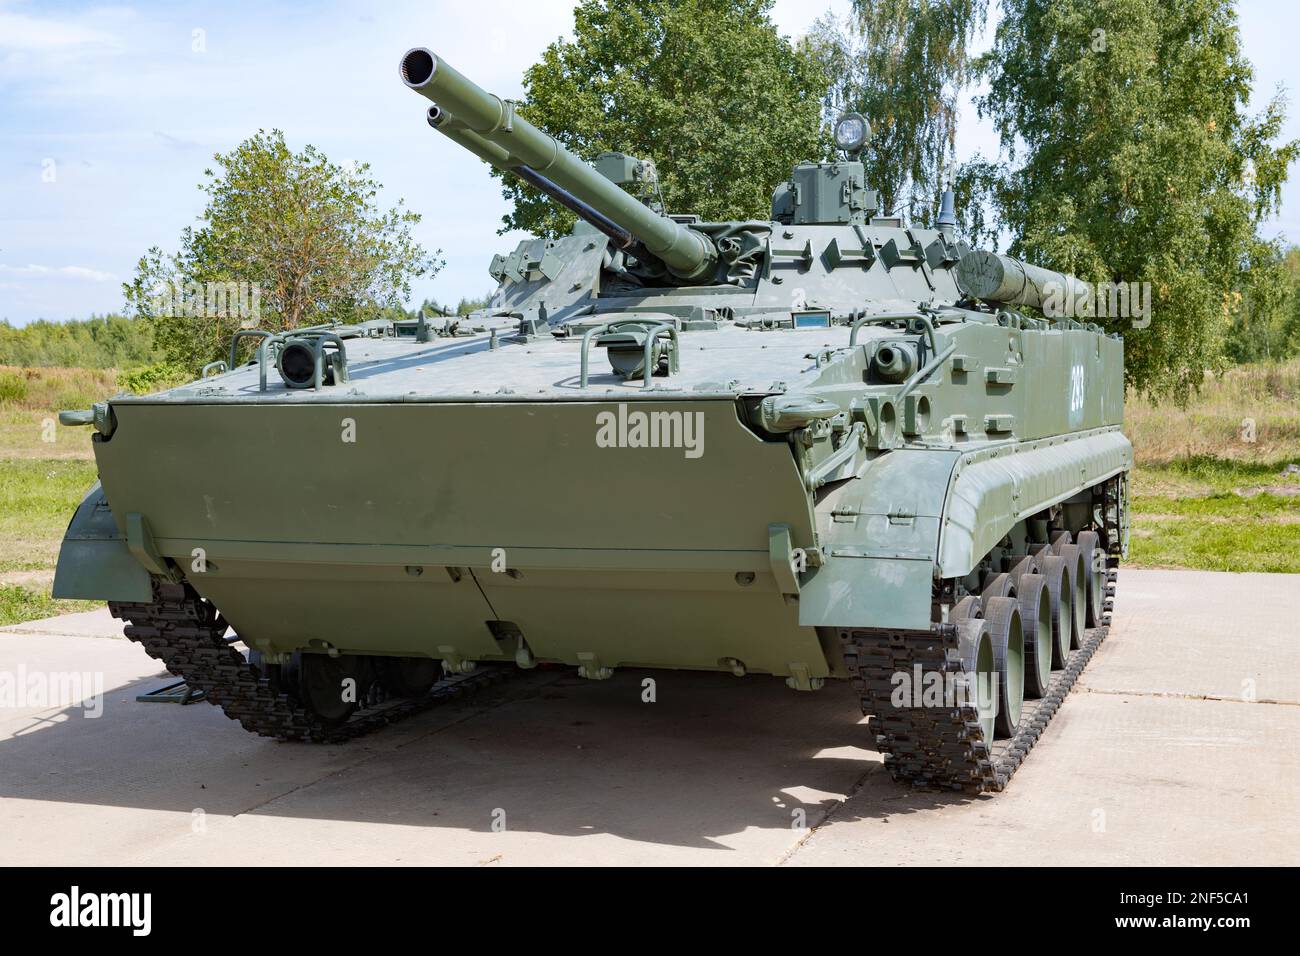 ALABINO, RUSSIA - AUGUST 19, 2022: BMP-3 infantry fighting vehicle on a sunny August day. Front view Stock Photo